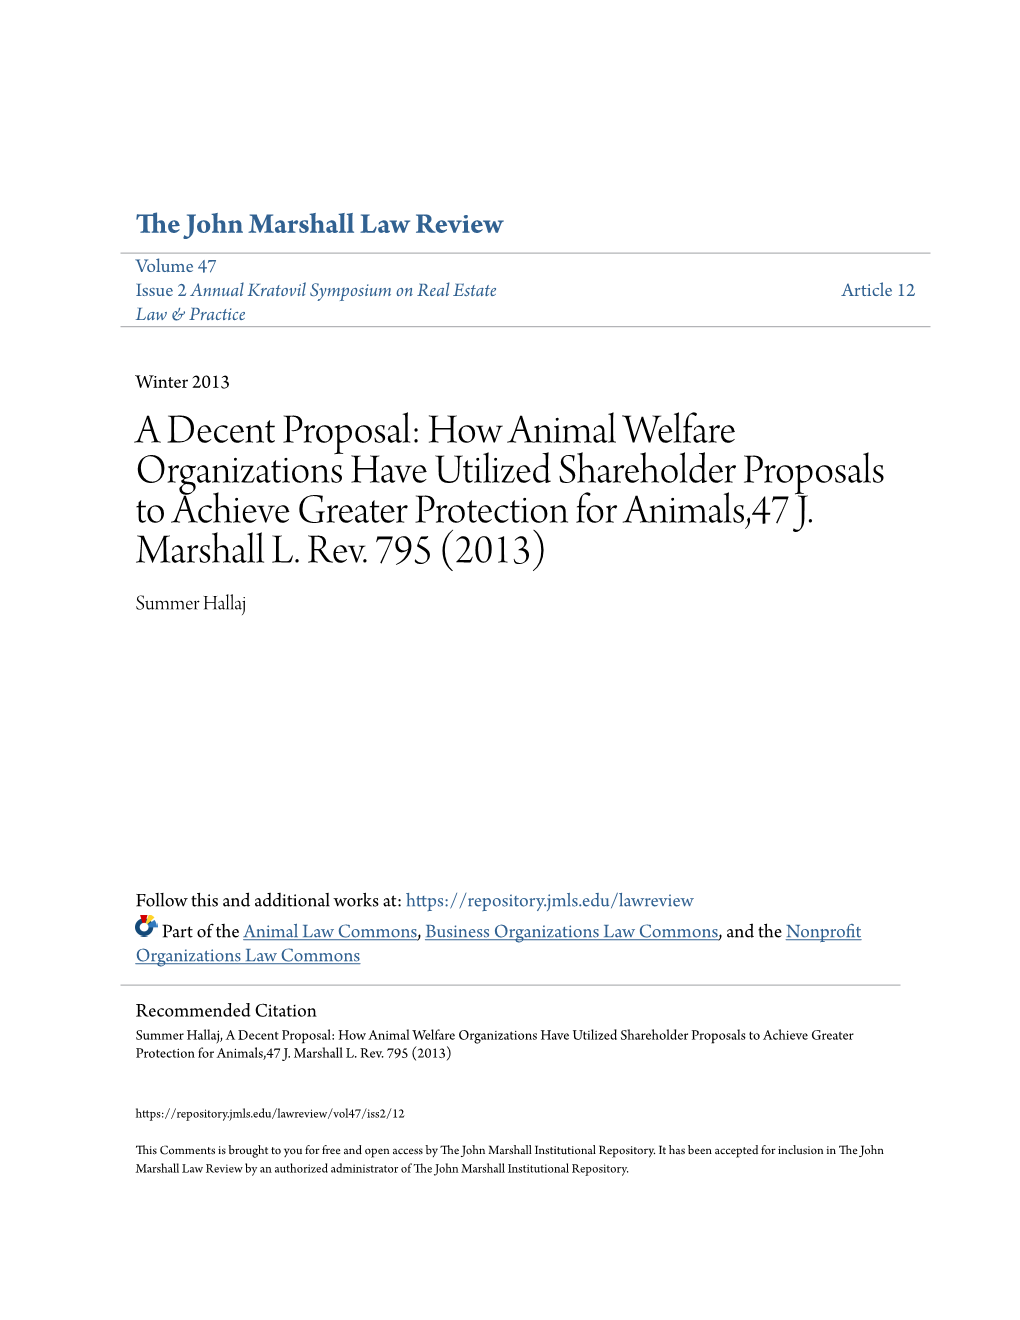 How Animal Welfare Organizations Have Utilized Shareholder Proposals to Achieve Greater Protection for Animals,47 J